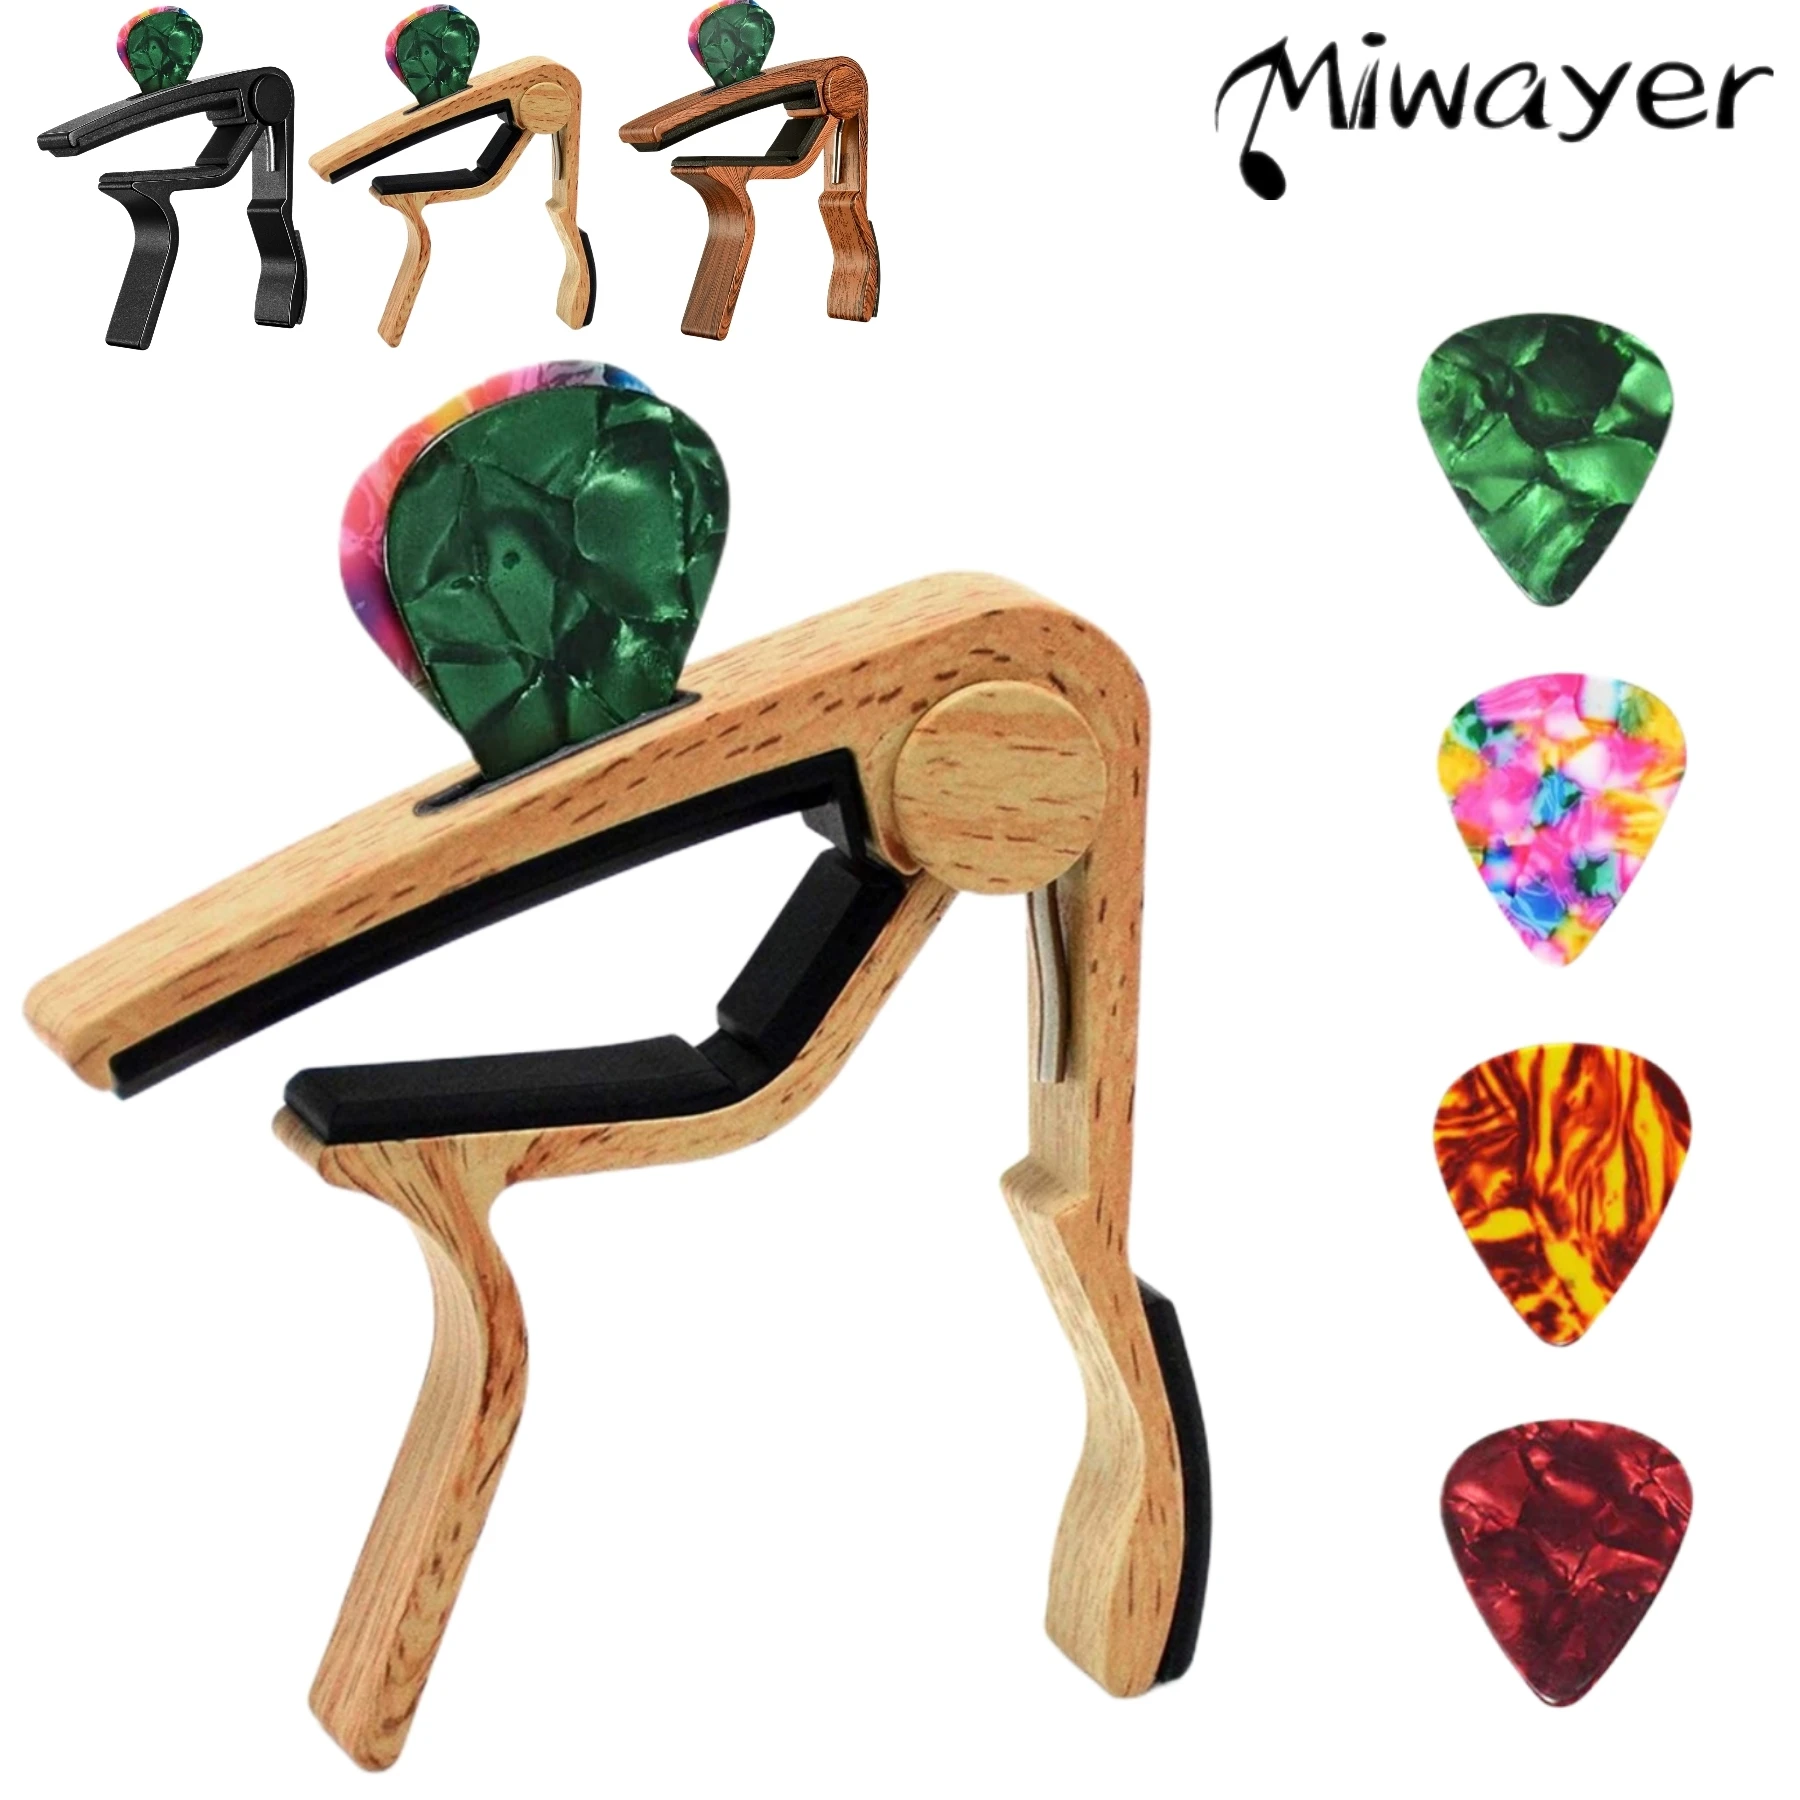 

Miwayer Capo,Guitar Capo,Rosewood Capo with Pick Holder and Picks for Acoustic Electric Guitar,Ukulele,Mandolin,Banjo